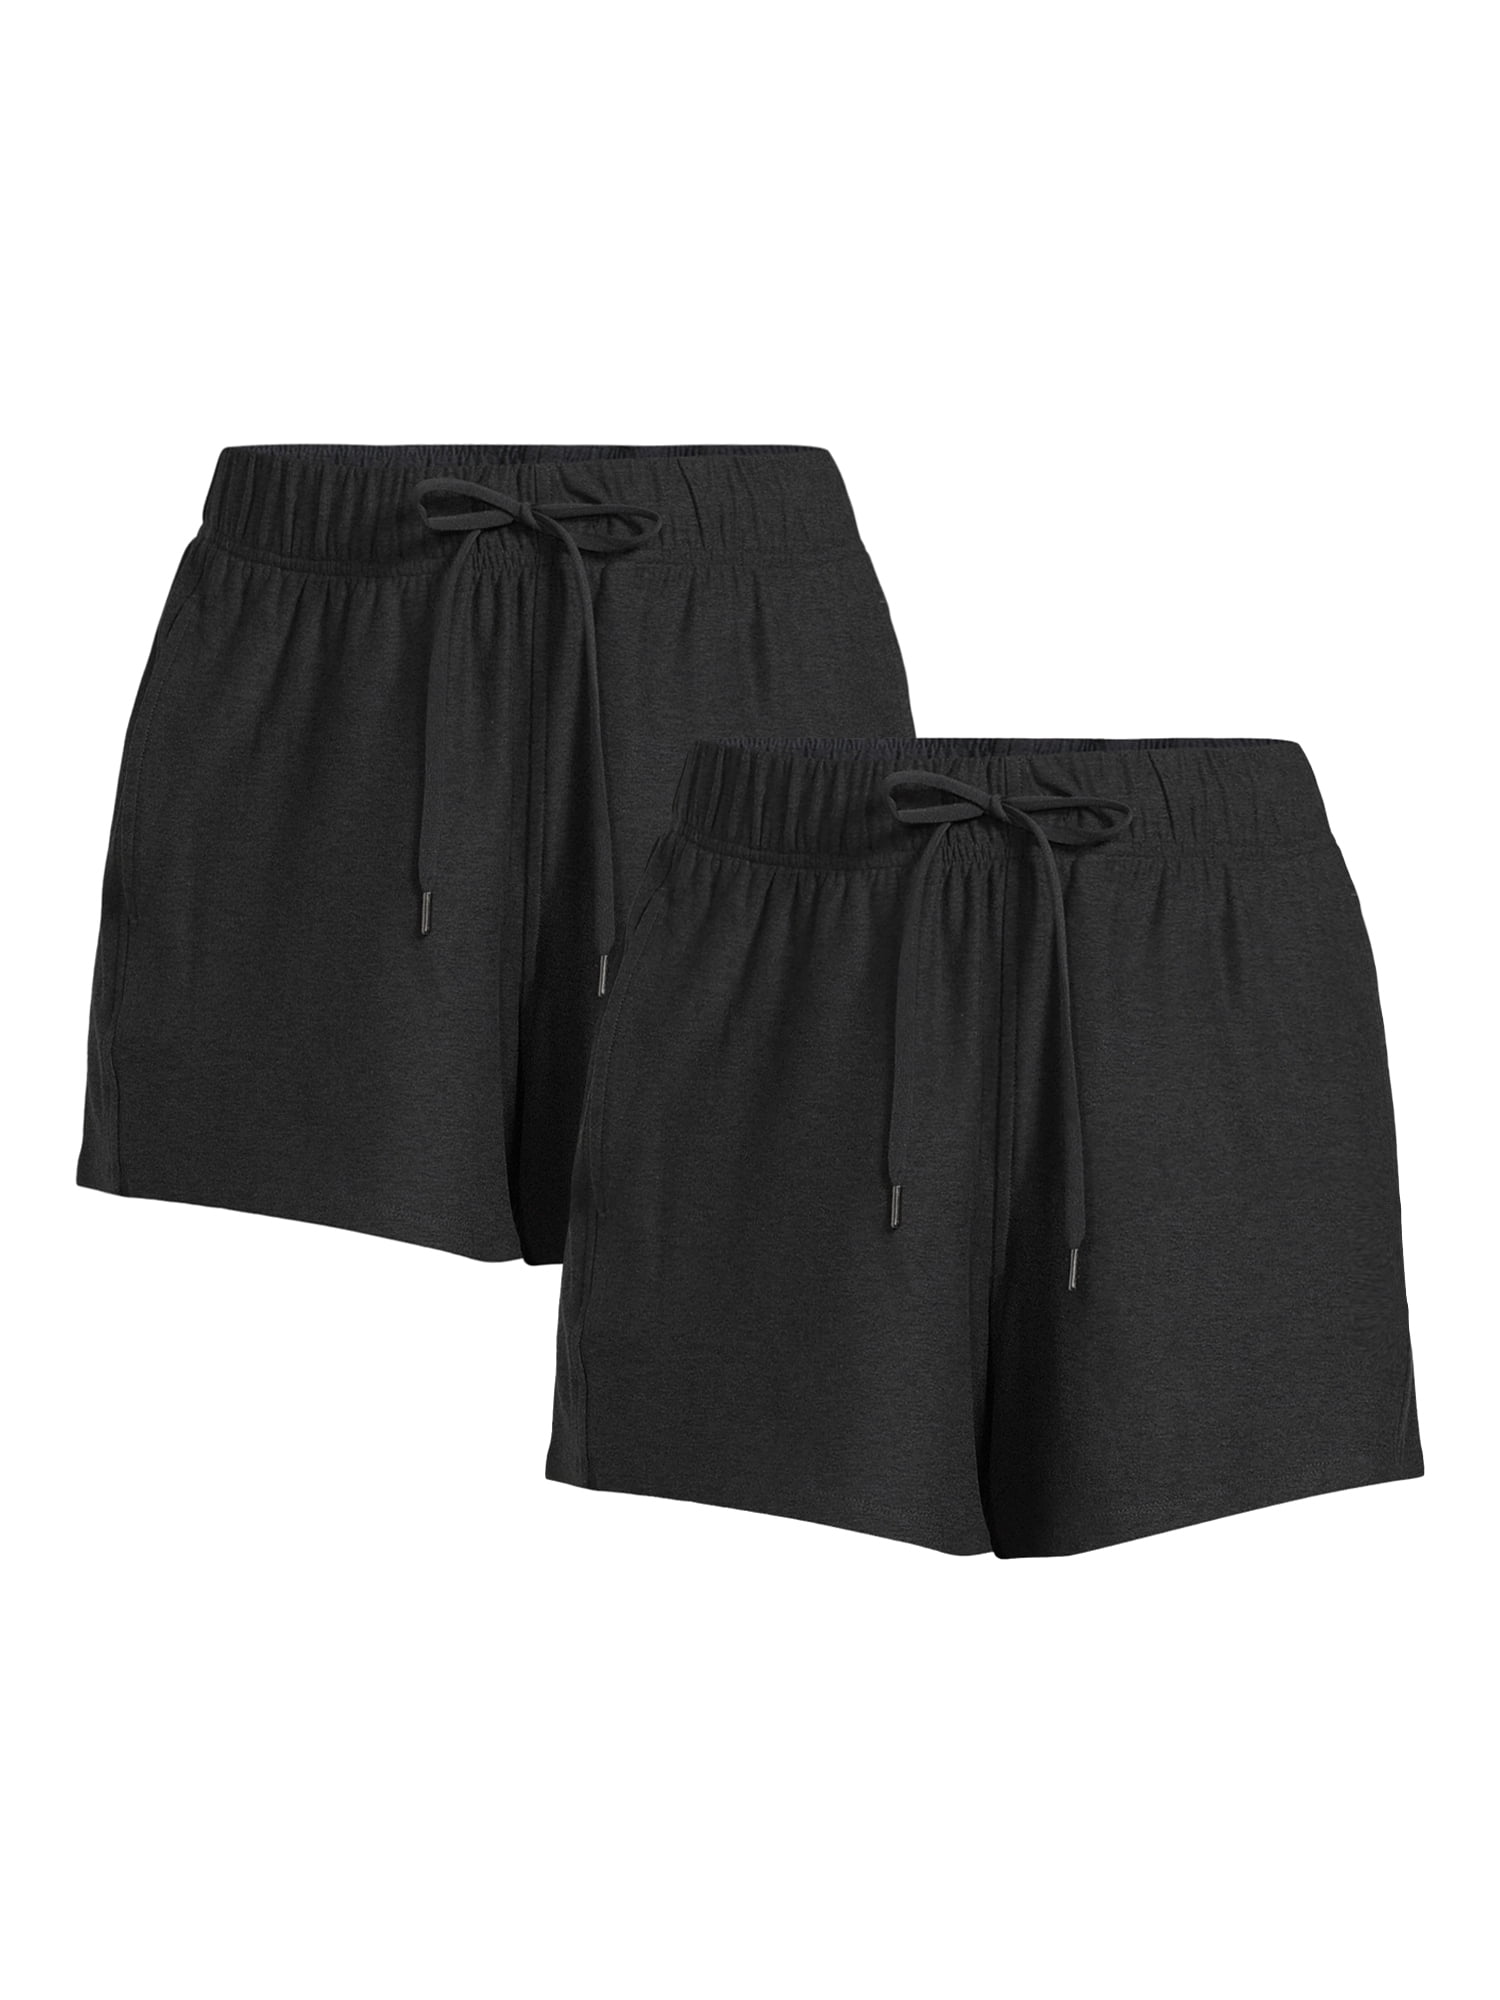 Athletic Works Women's Buttery Soft Performance 2-Pack Gym Shorts, 4” Inseam, Sizes XS-XXXL